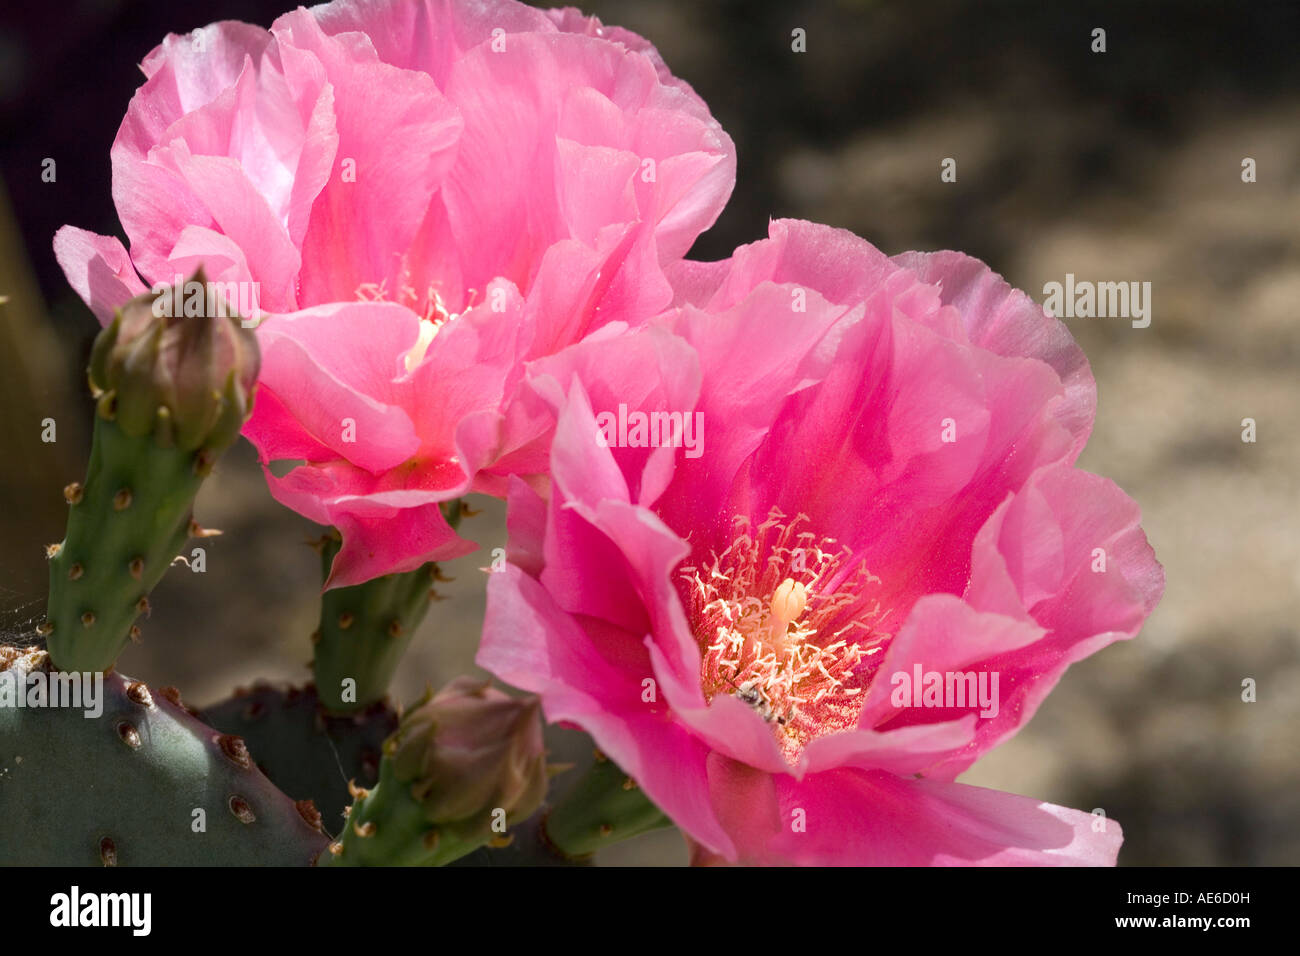 Prickly Pear Cactus Opuntia phaeacantha in bloom Stock Photo